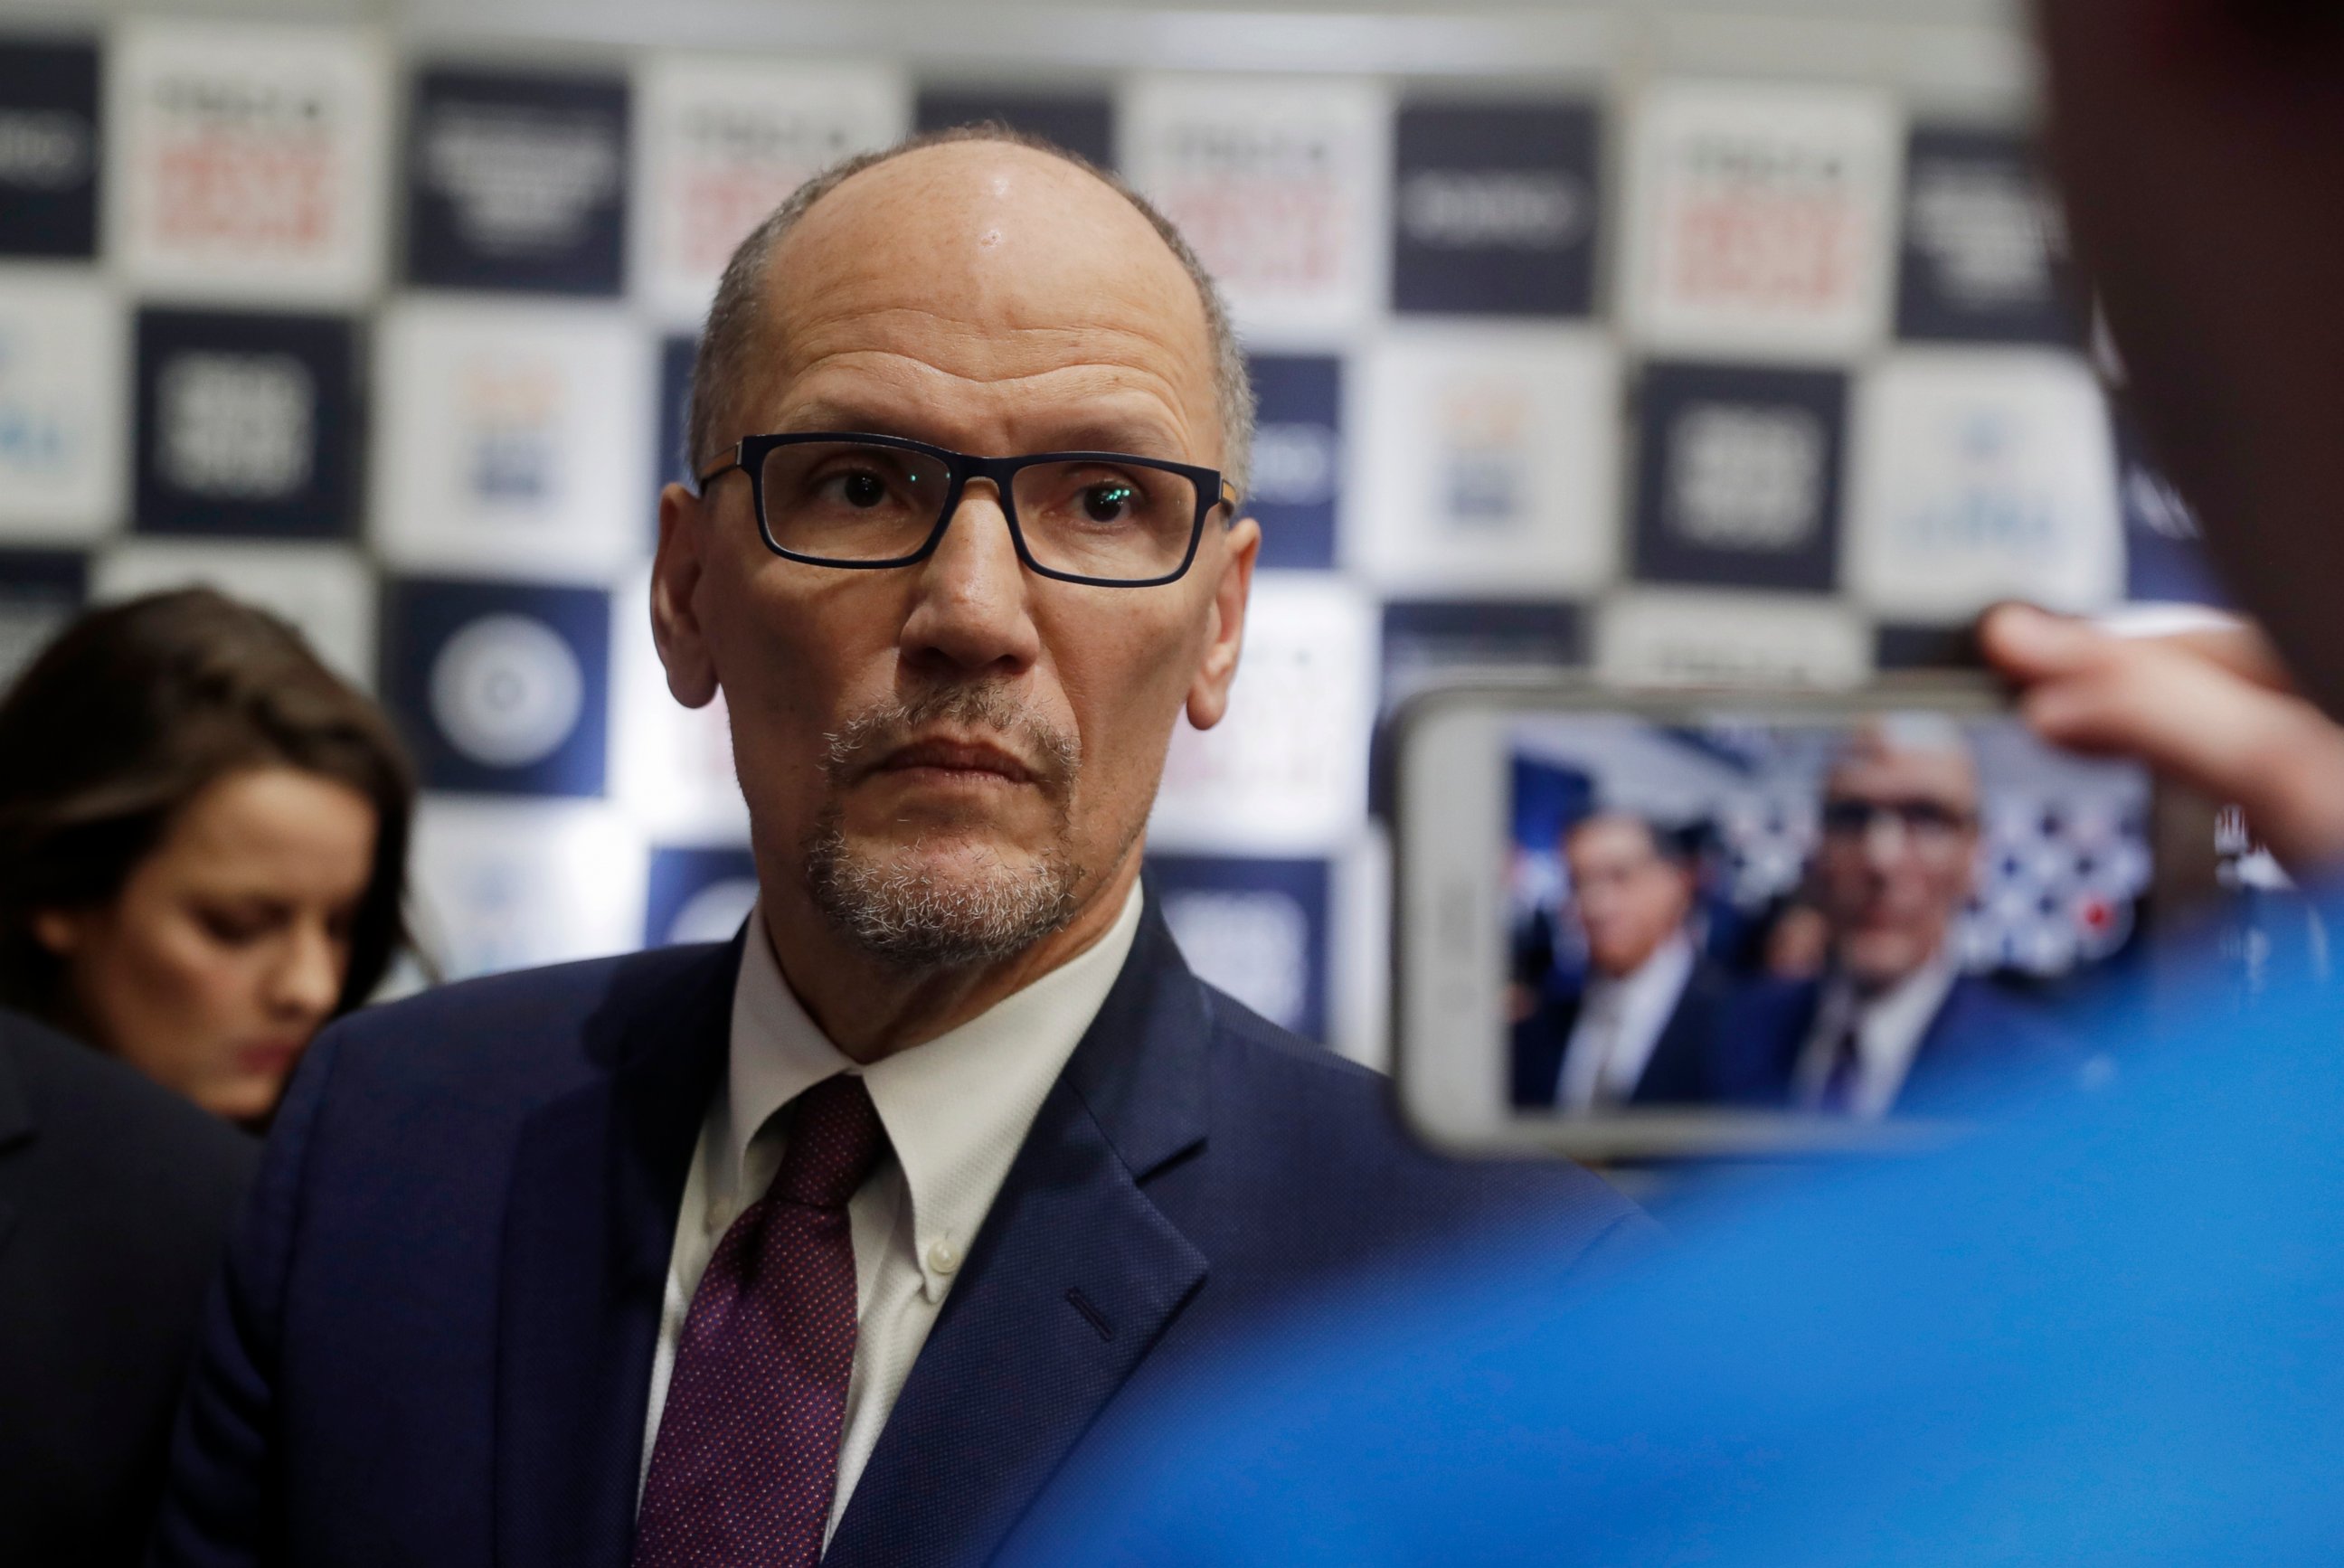 PHOTO: In this Dec. 19, 2019, file photo Democratic National Committee chairman Tom Perez is recorded on a phone before a Democratic presidential primary debate in Los Angeles.